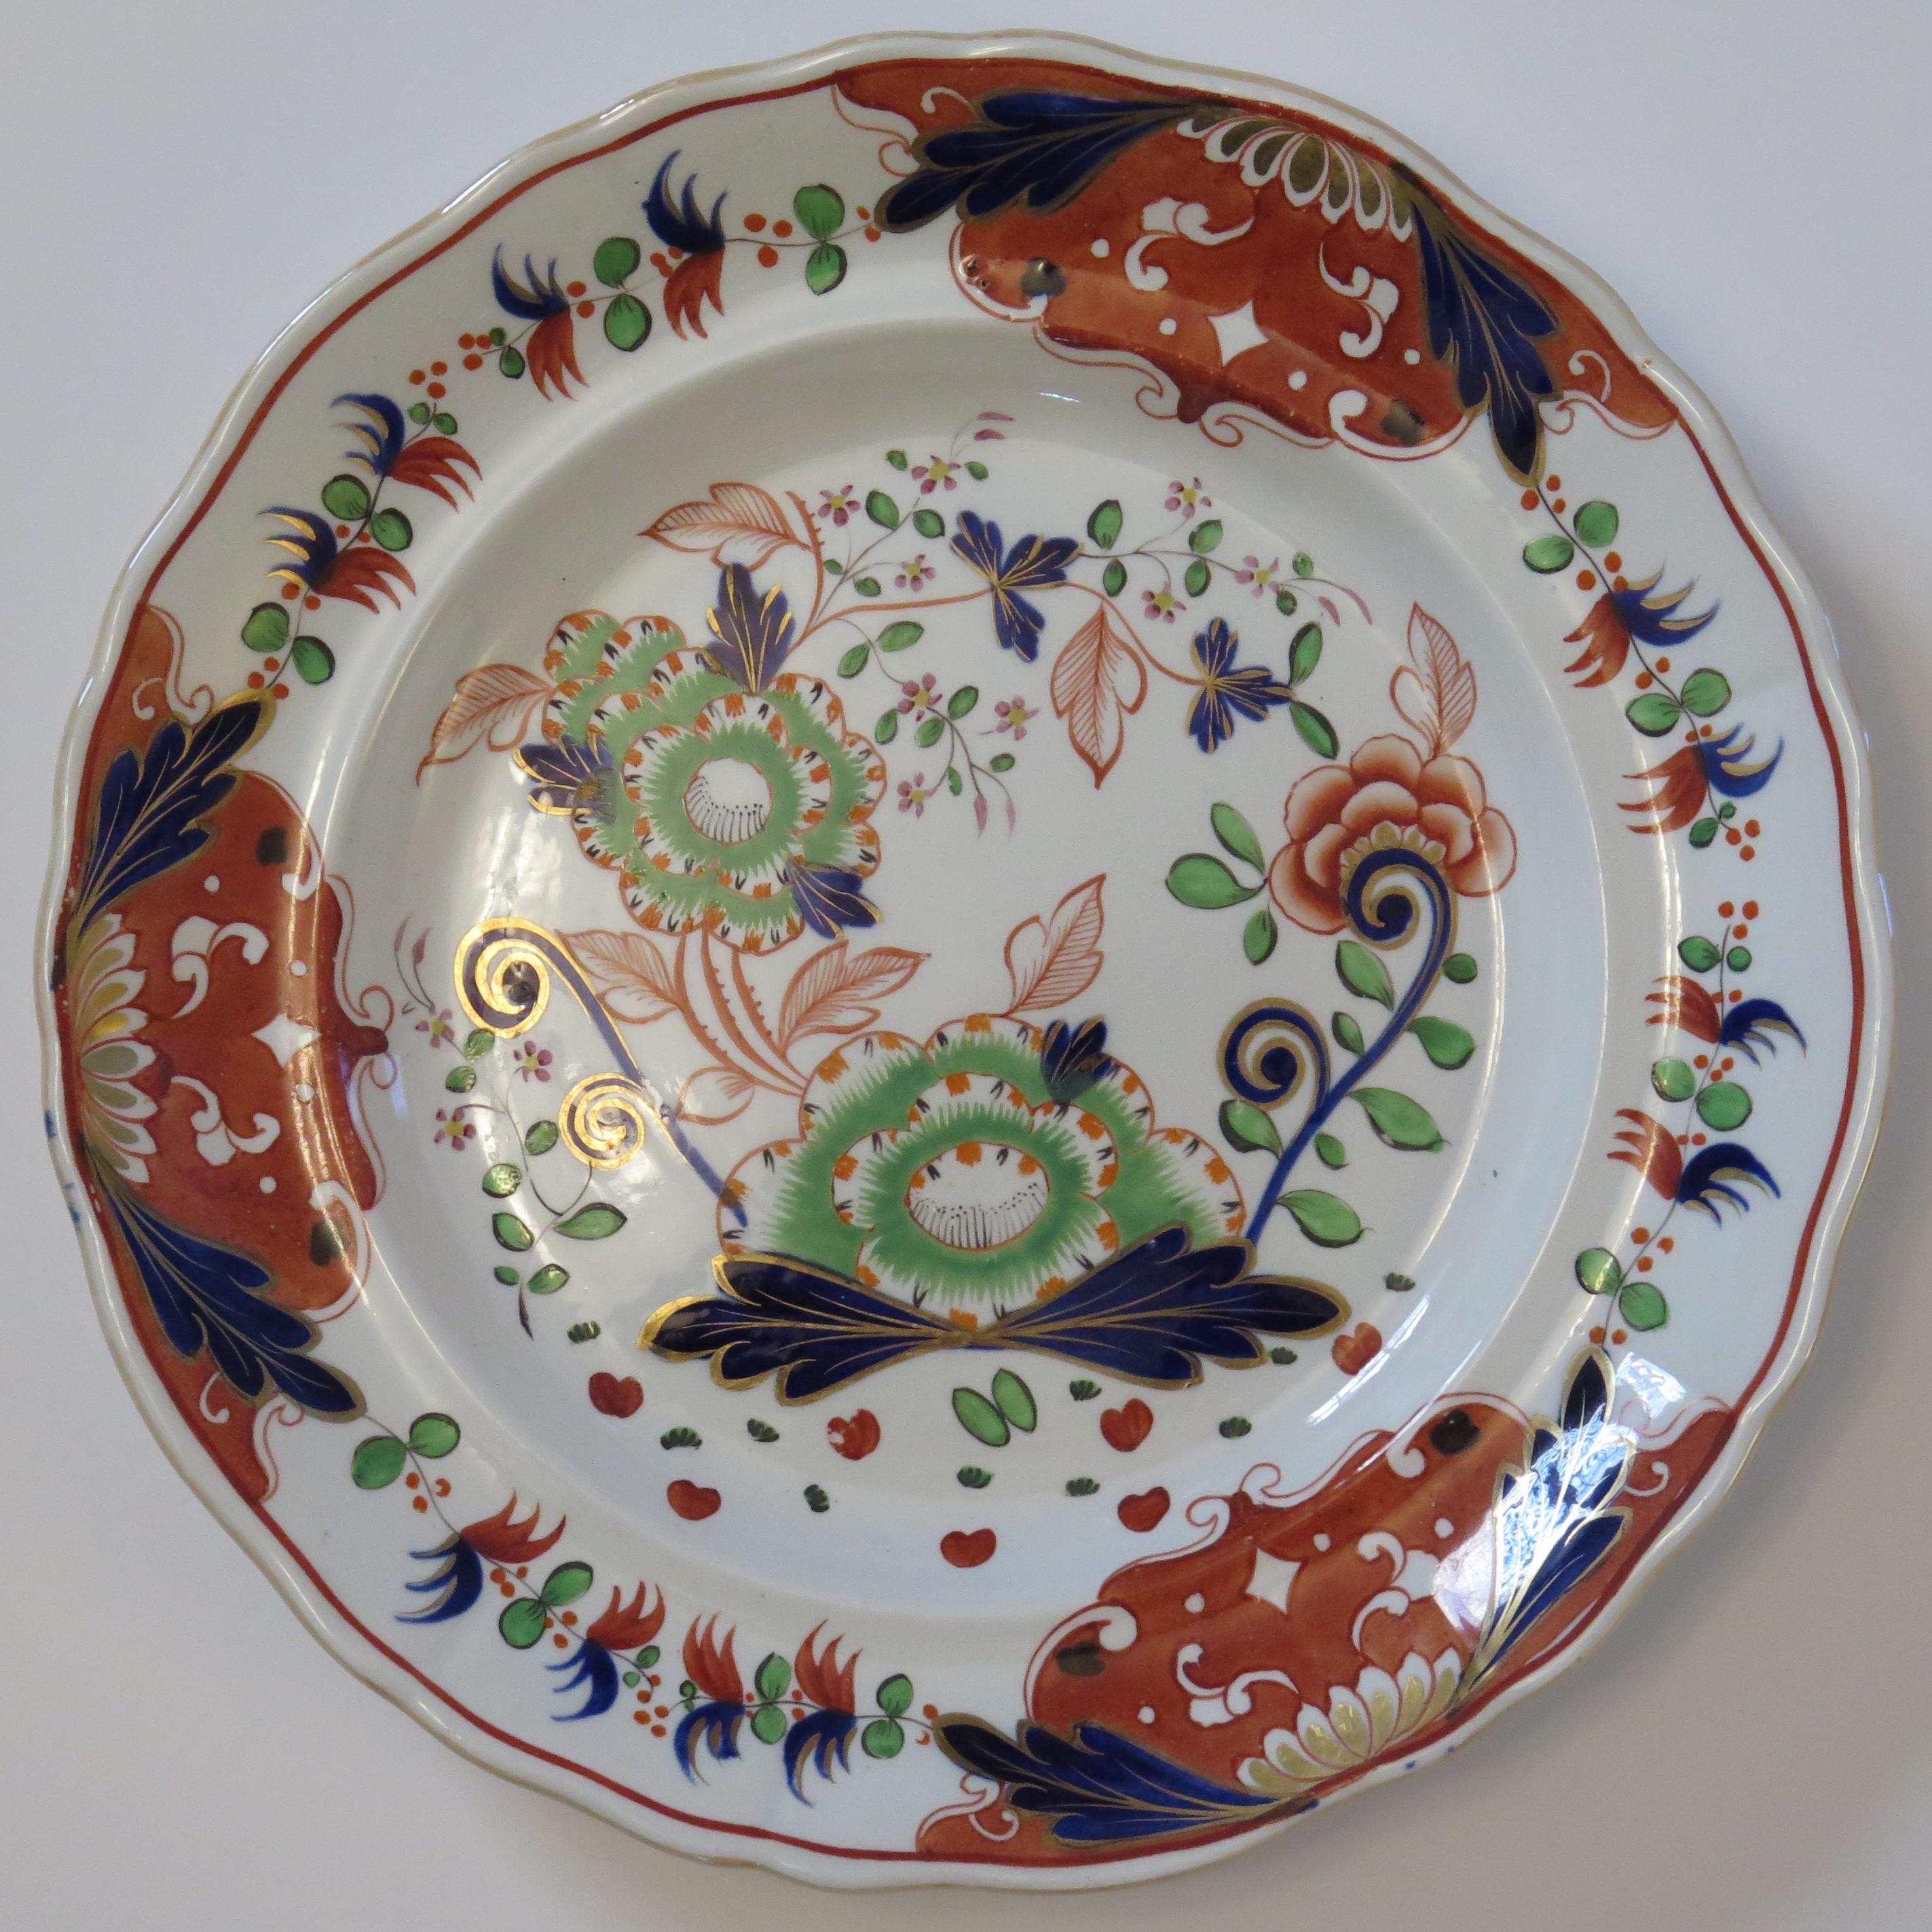 This is a very good, late Georgian Ironstone Dinner Plate decorated in a rare pattern No.58, manufactured by the English Davenport factory, which was situated in Longport, Staffordshire, England and dating to Circa 1815.

This is a large dinner